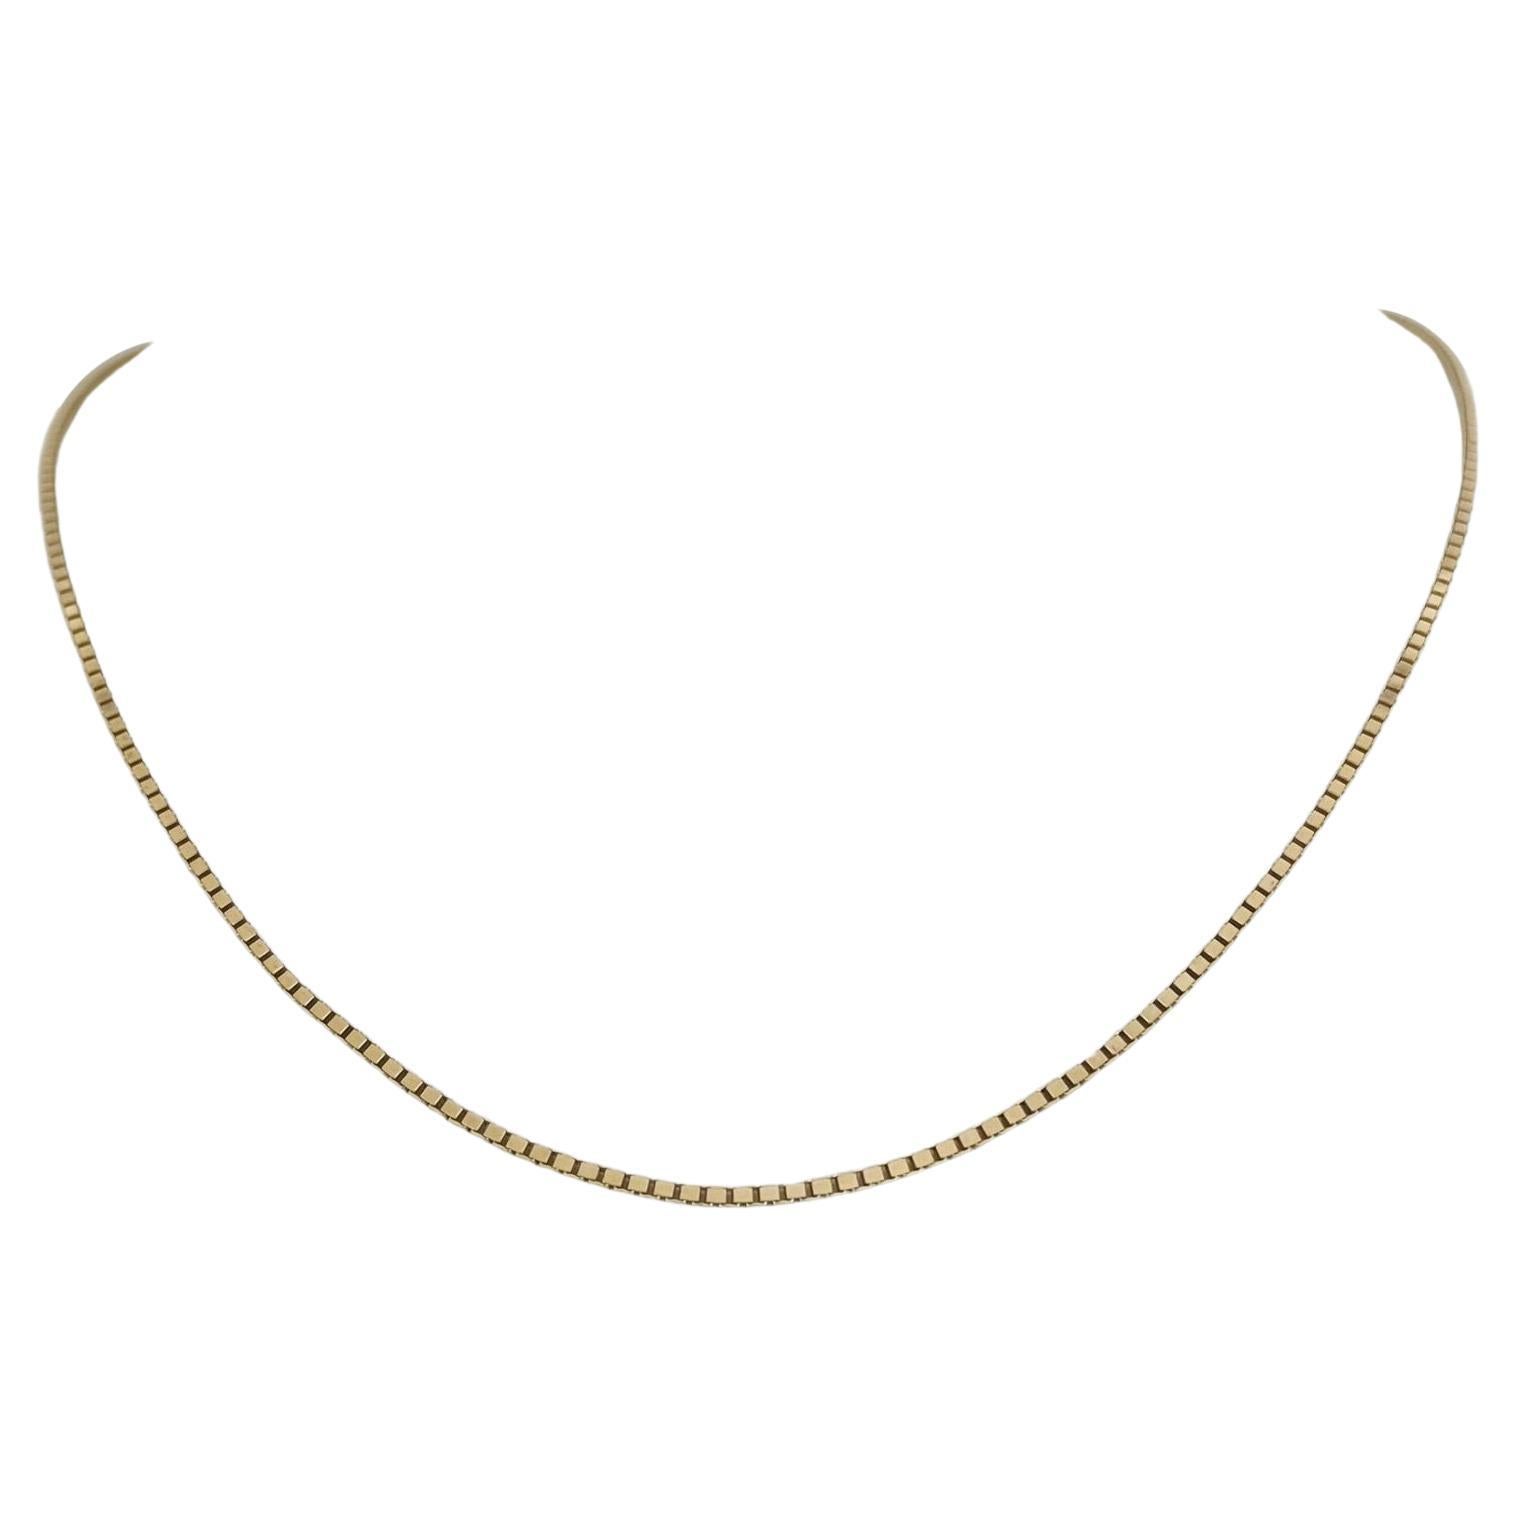 10 Karat Yellow Gold Solid Thin Box Link Chain Necklace